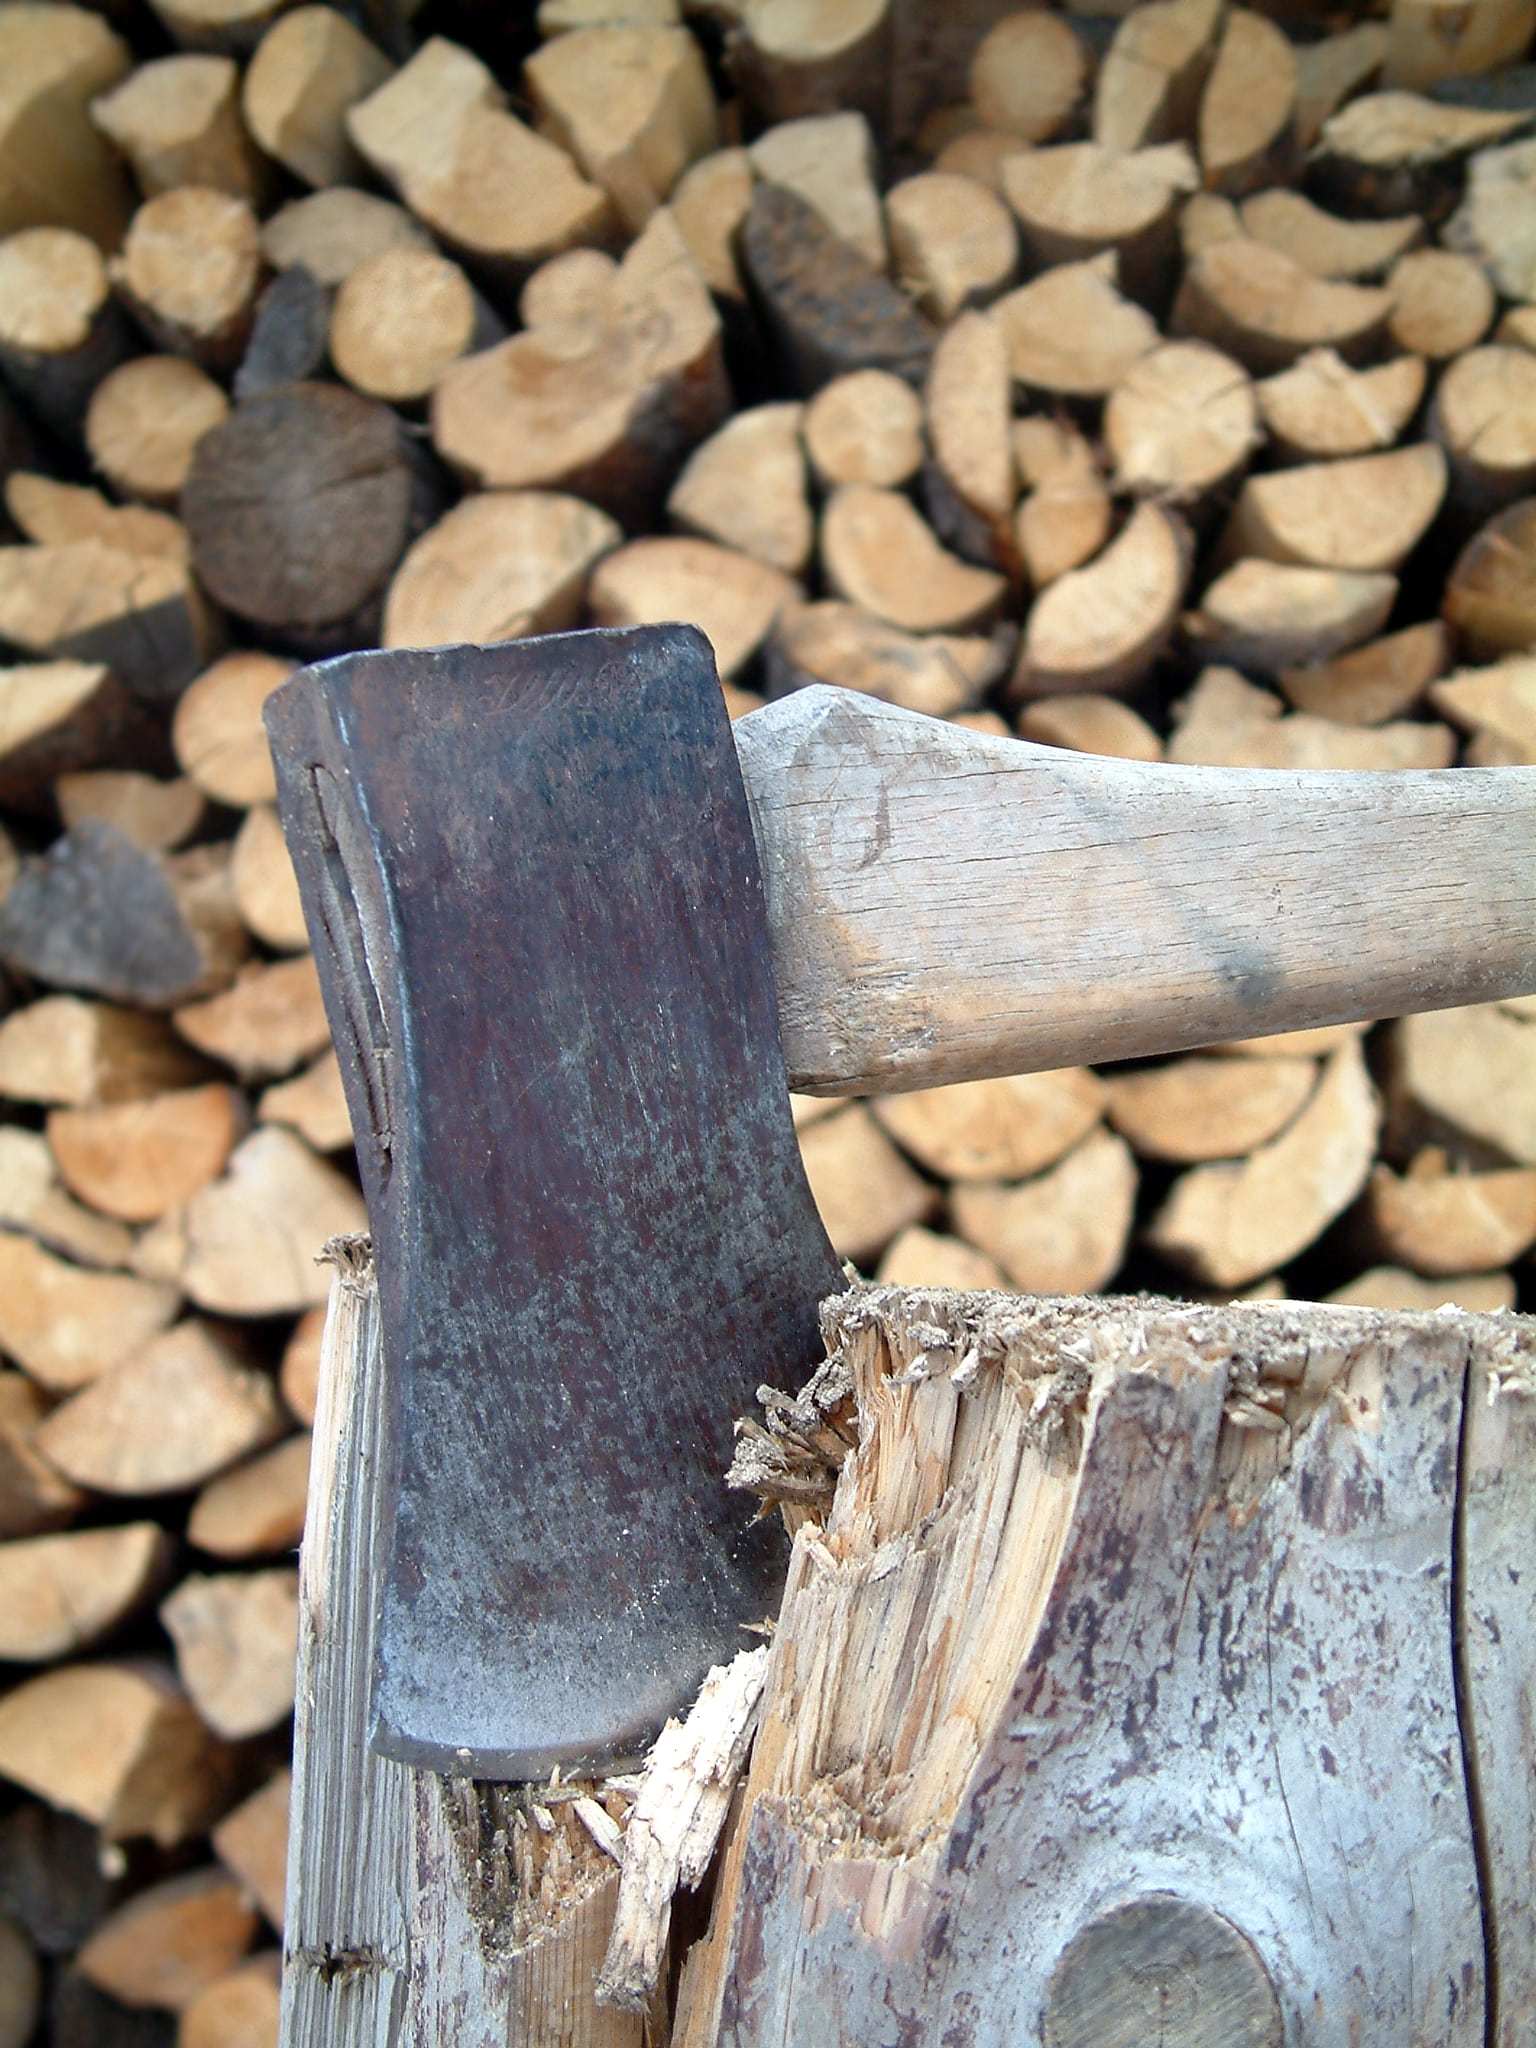 Chopped Firewood Sales and Delivery Services in Englewood OH